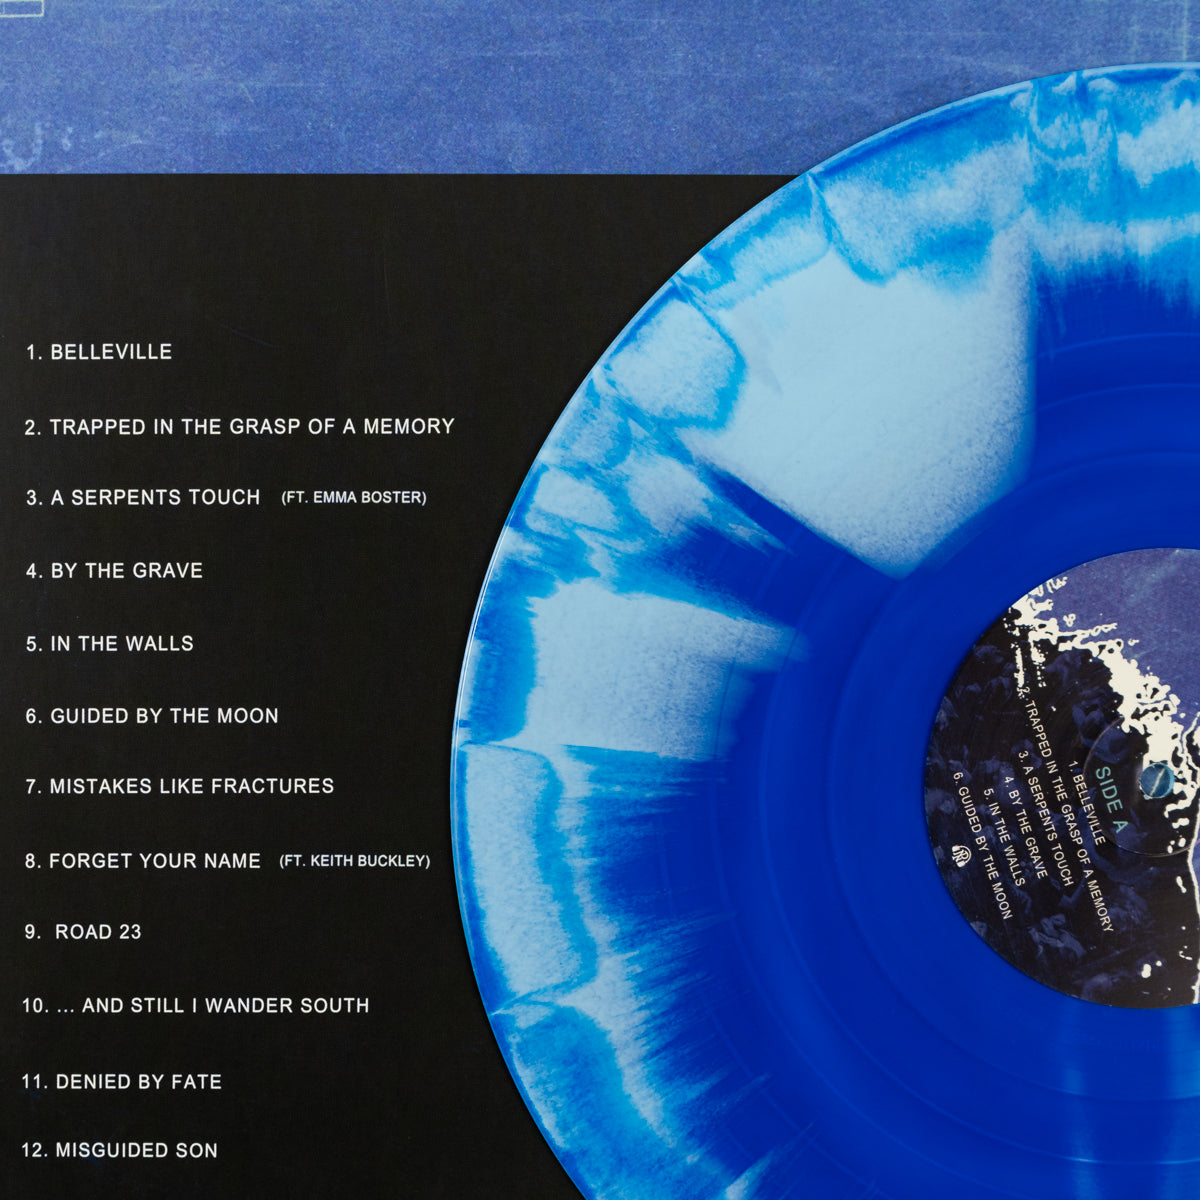 Knocked Loose-A Different Shade Of Blue Exclusive LP (Moonphase